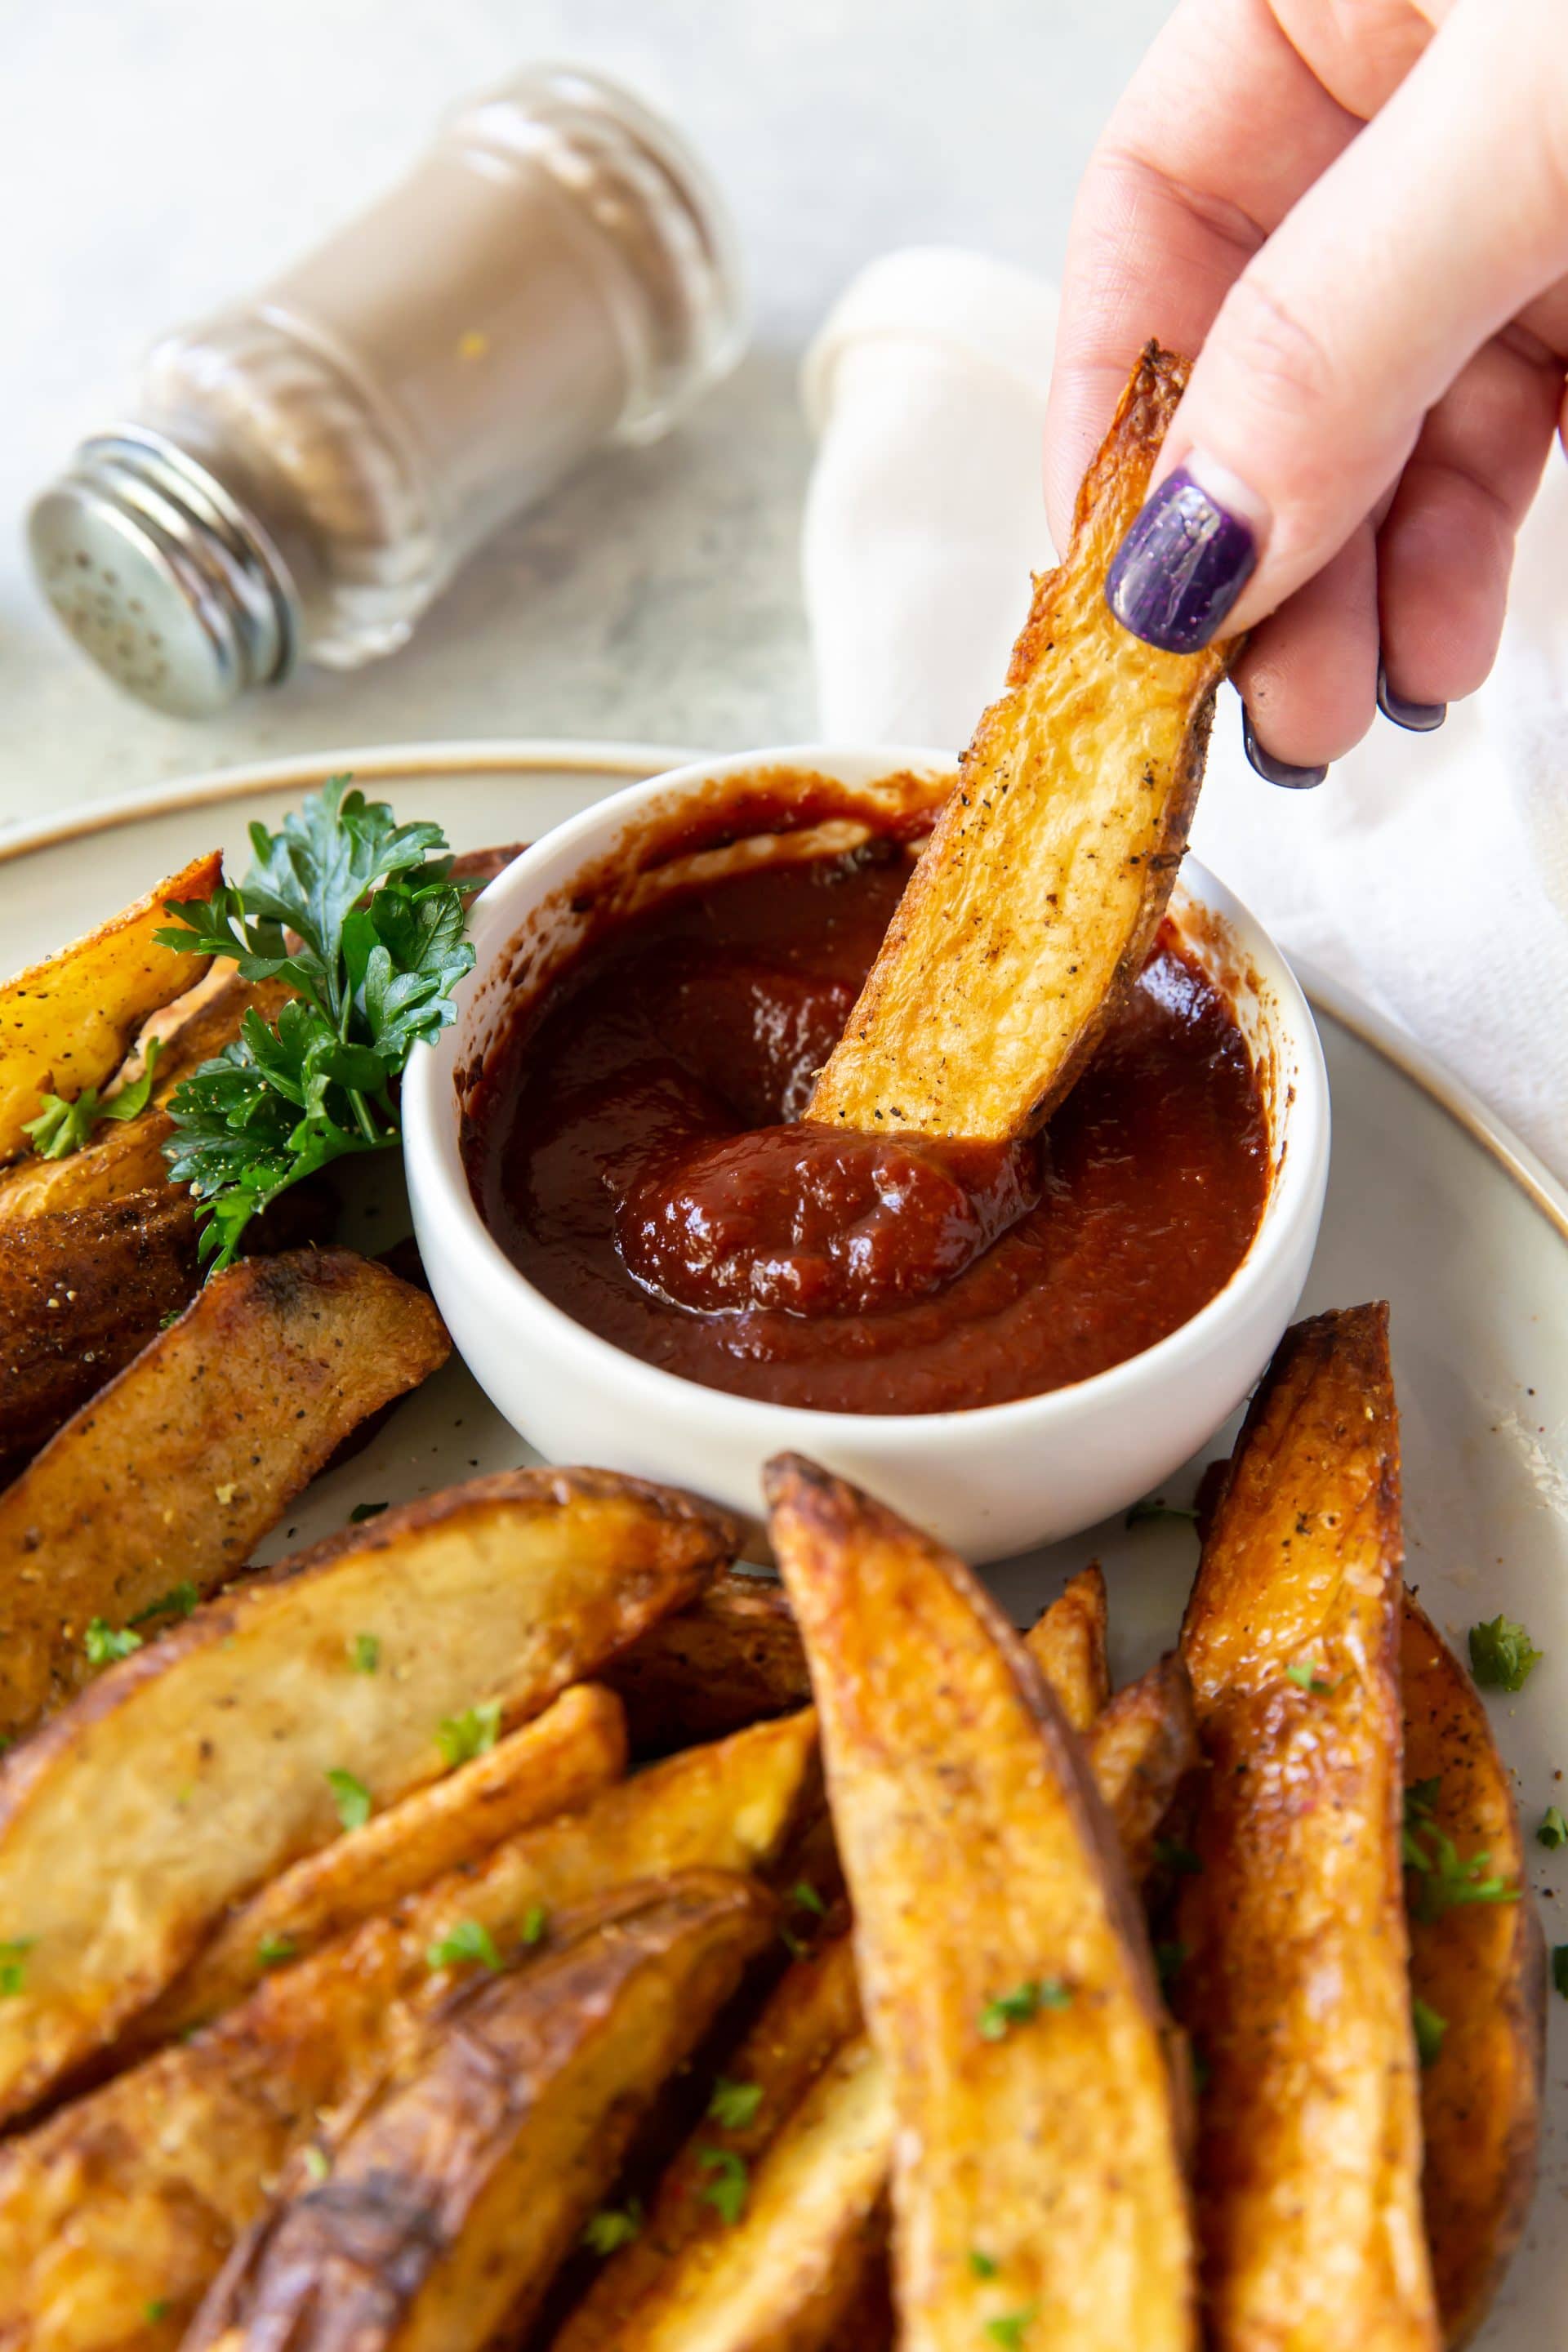 a plate of seasoned, cooked potato wedges with a side cup of ketchup., hand with purple nail dipping fry into ketchup